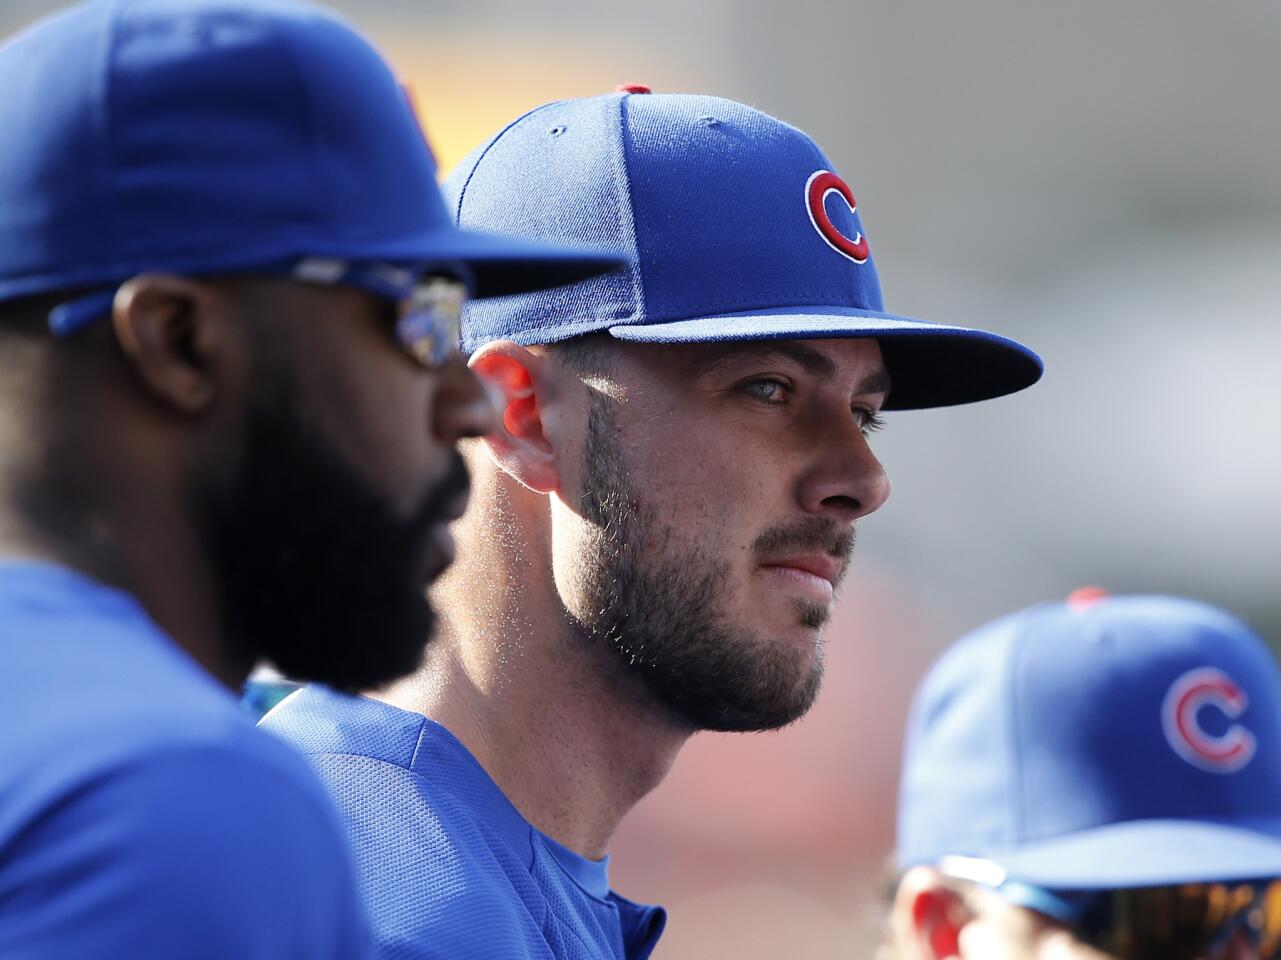 The Cubs' Kris Bryant, center, listens to the team group discussion before a game against the Padres in San Diego, Friday, July 13, 2018.